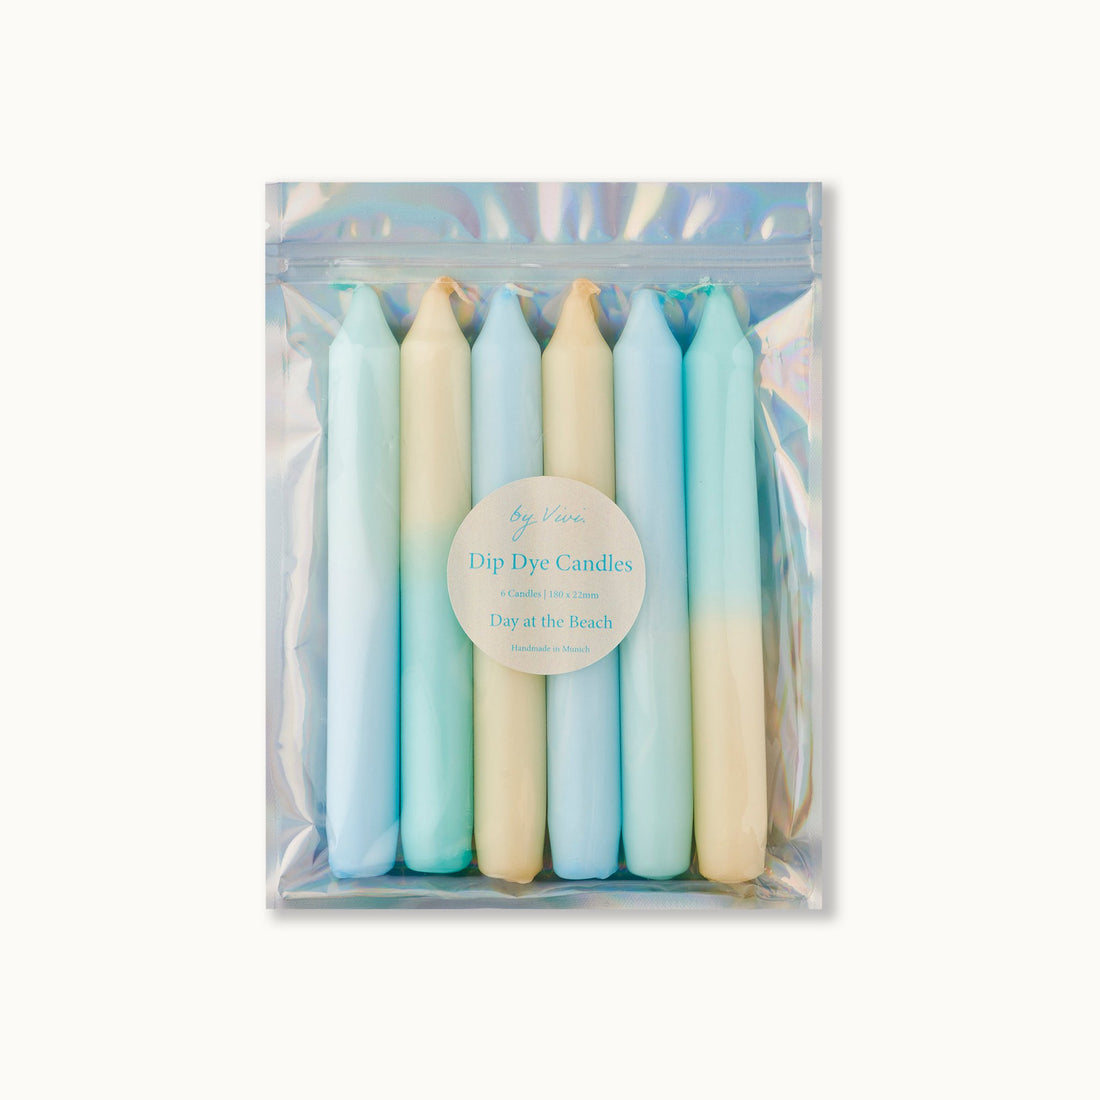 Dip dye candles in a set: Day at the Beach